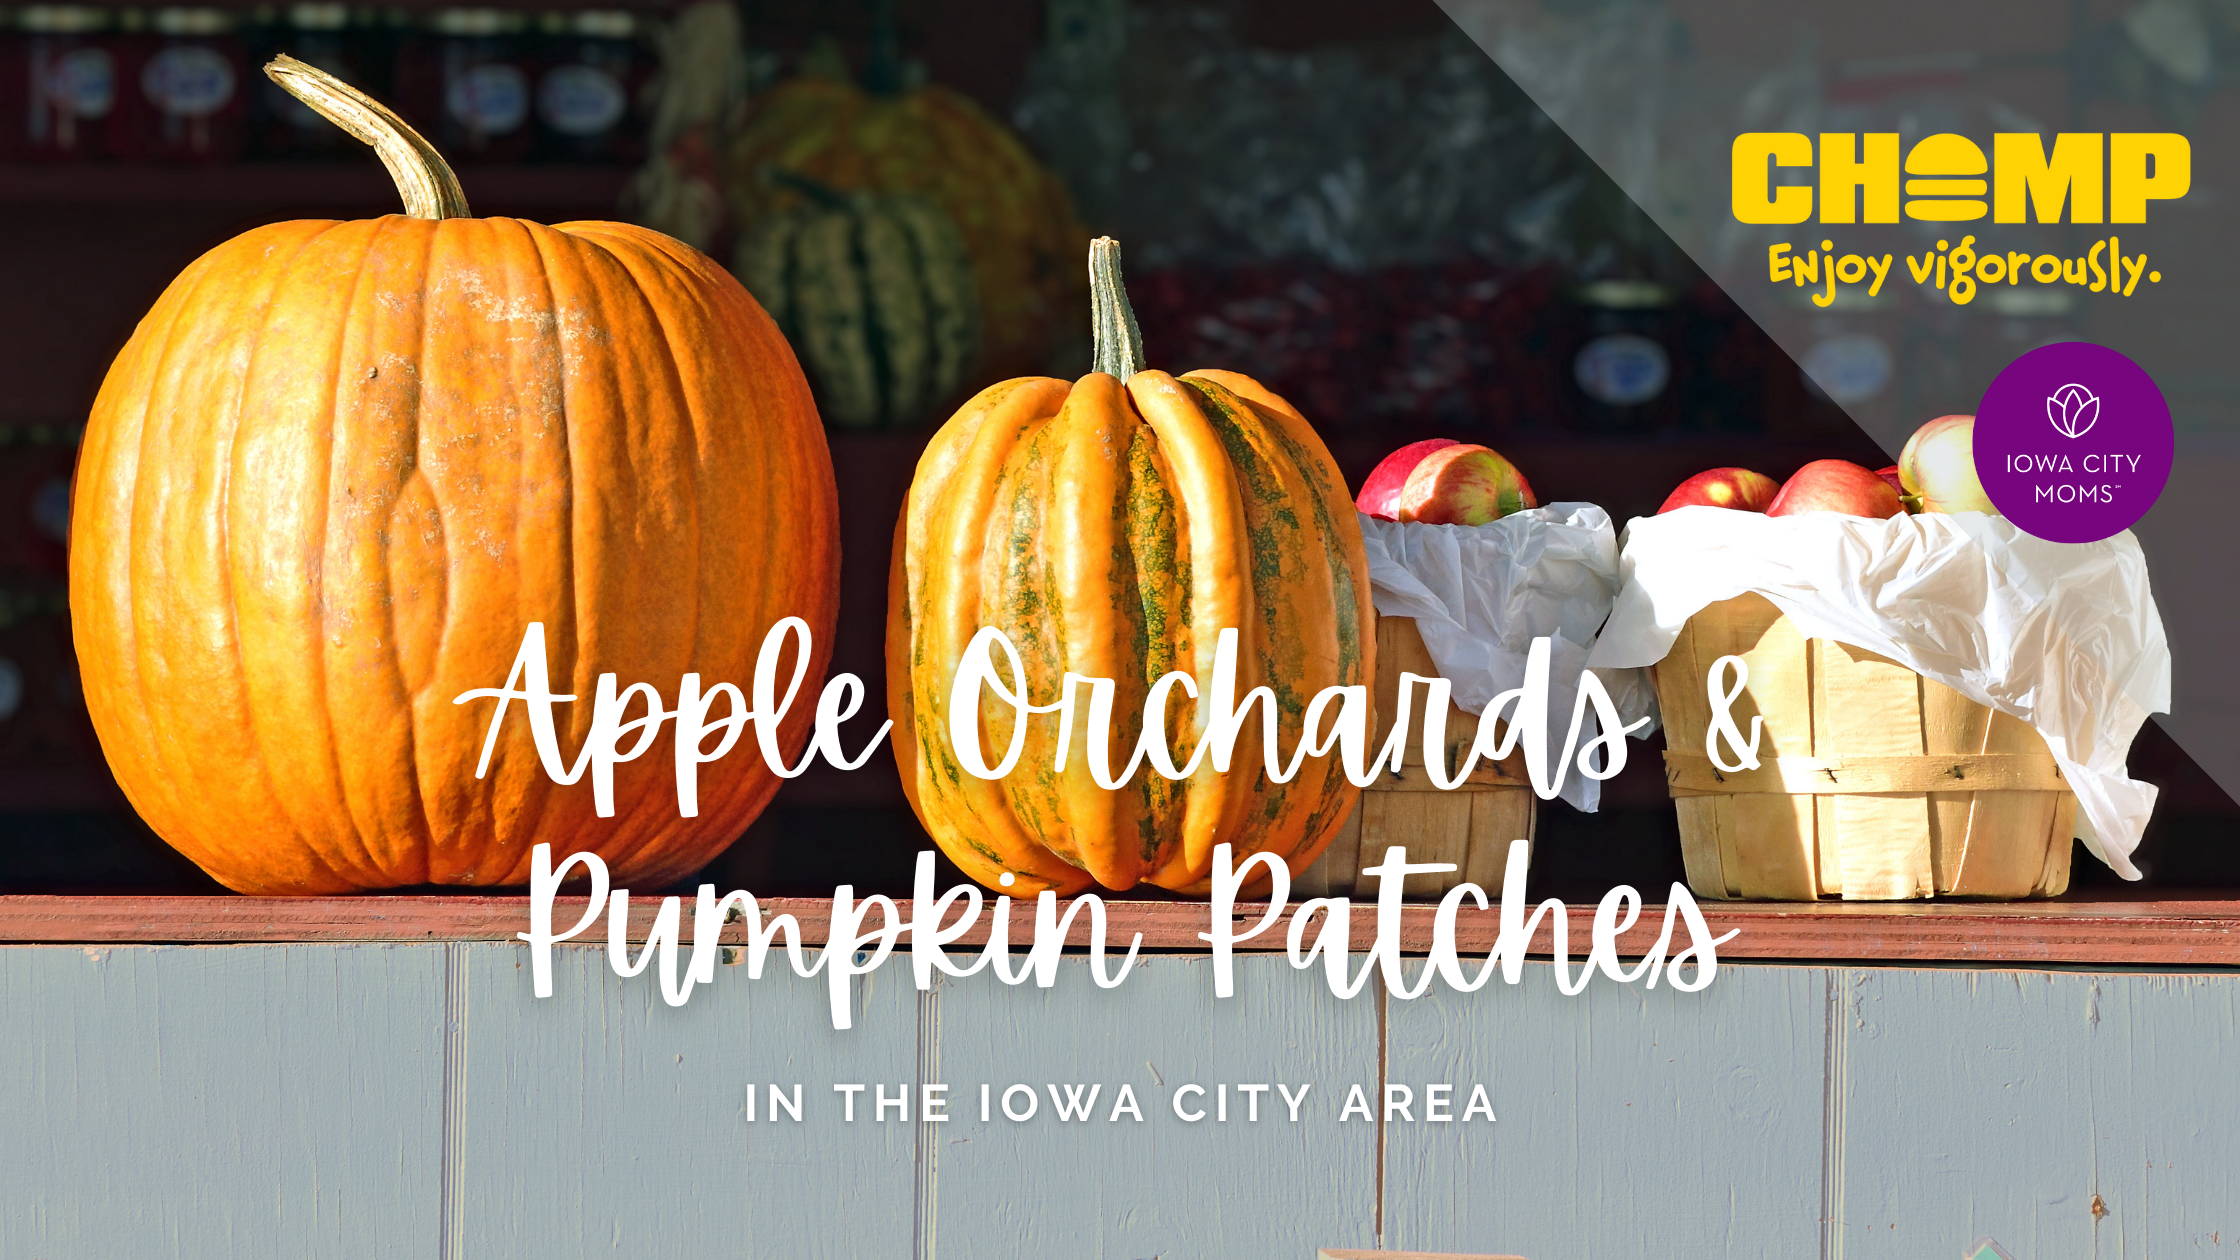 Apple Orchards and Pumpkin Patches in the Iowa City Area